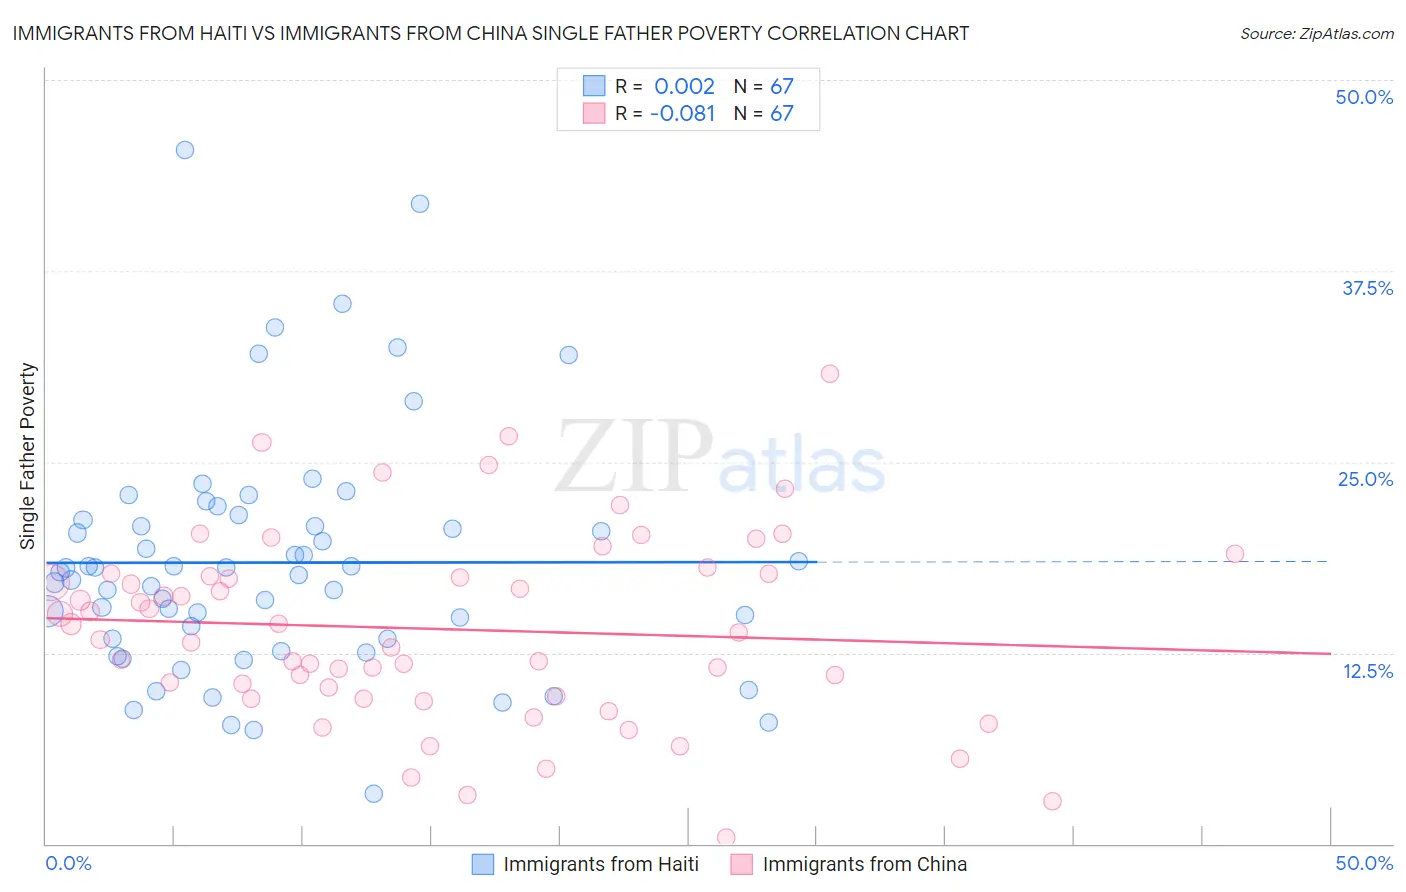 Immigrants from Haiti vs Immigrants from China Single Father Poverty